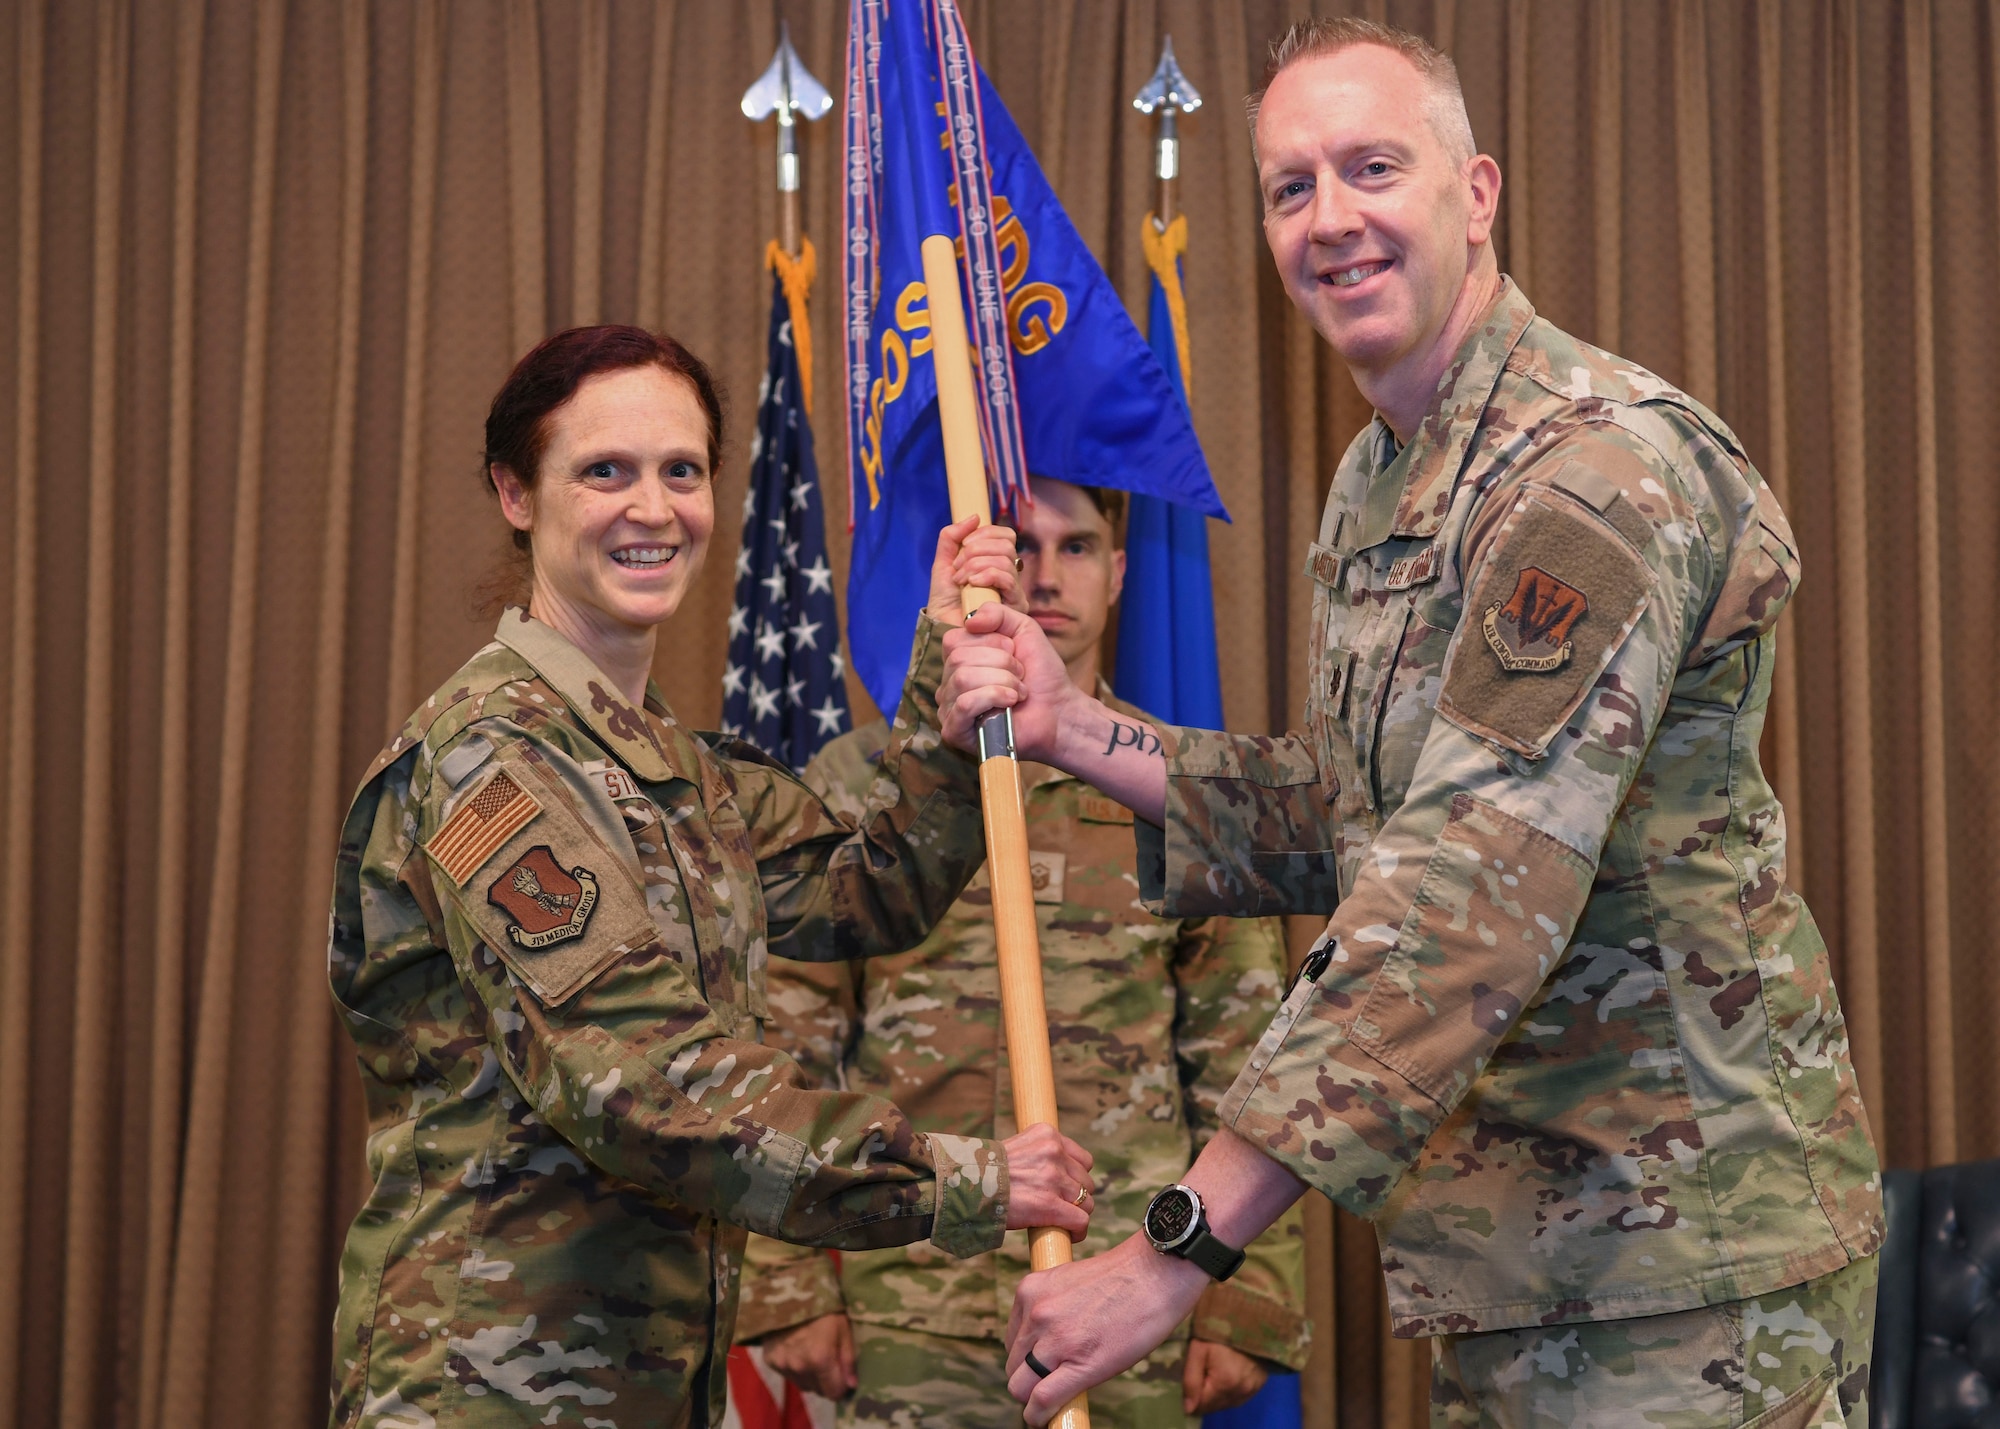 Two people in green uniforms hold a flag.